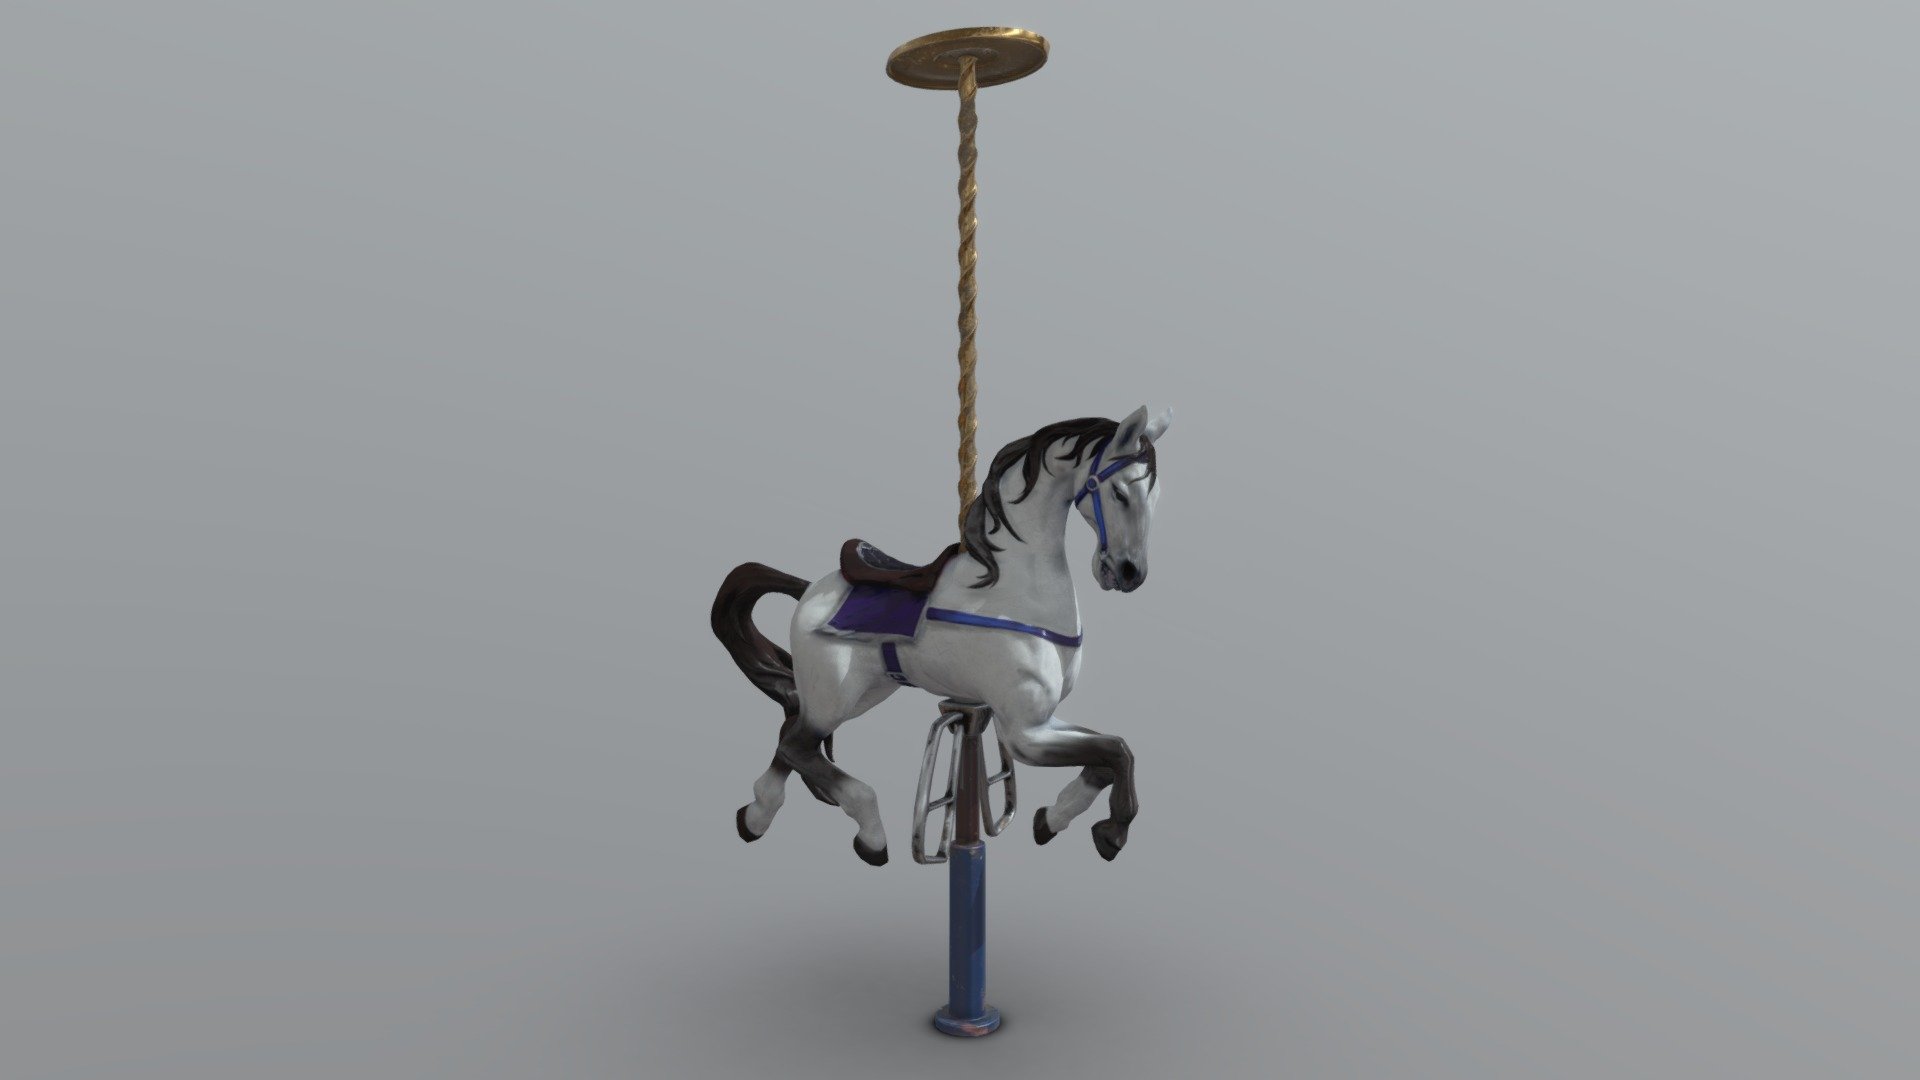 Verticles: 13,845
Tris: 27,619

This was my first time sculpting in Blender and texturing in Substance Painter. I'm very happy to share the results! - Simple carousel horse - 3D model by Kaa (@PngHeavy) 3d model